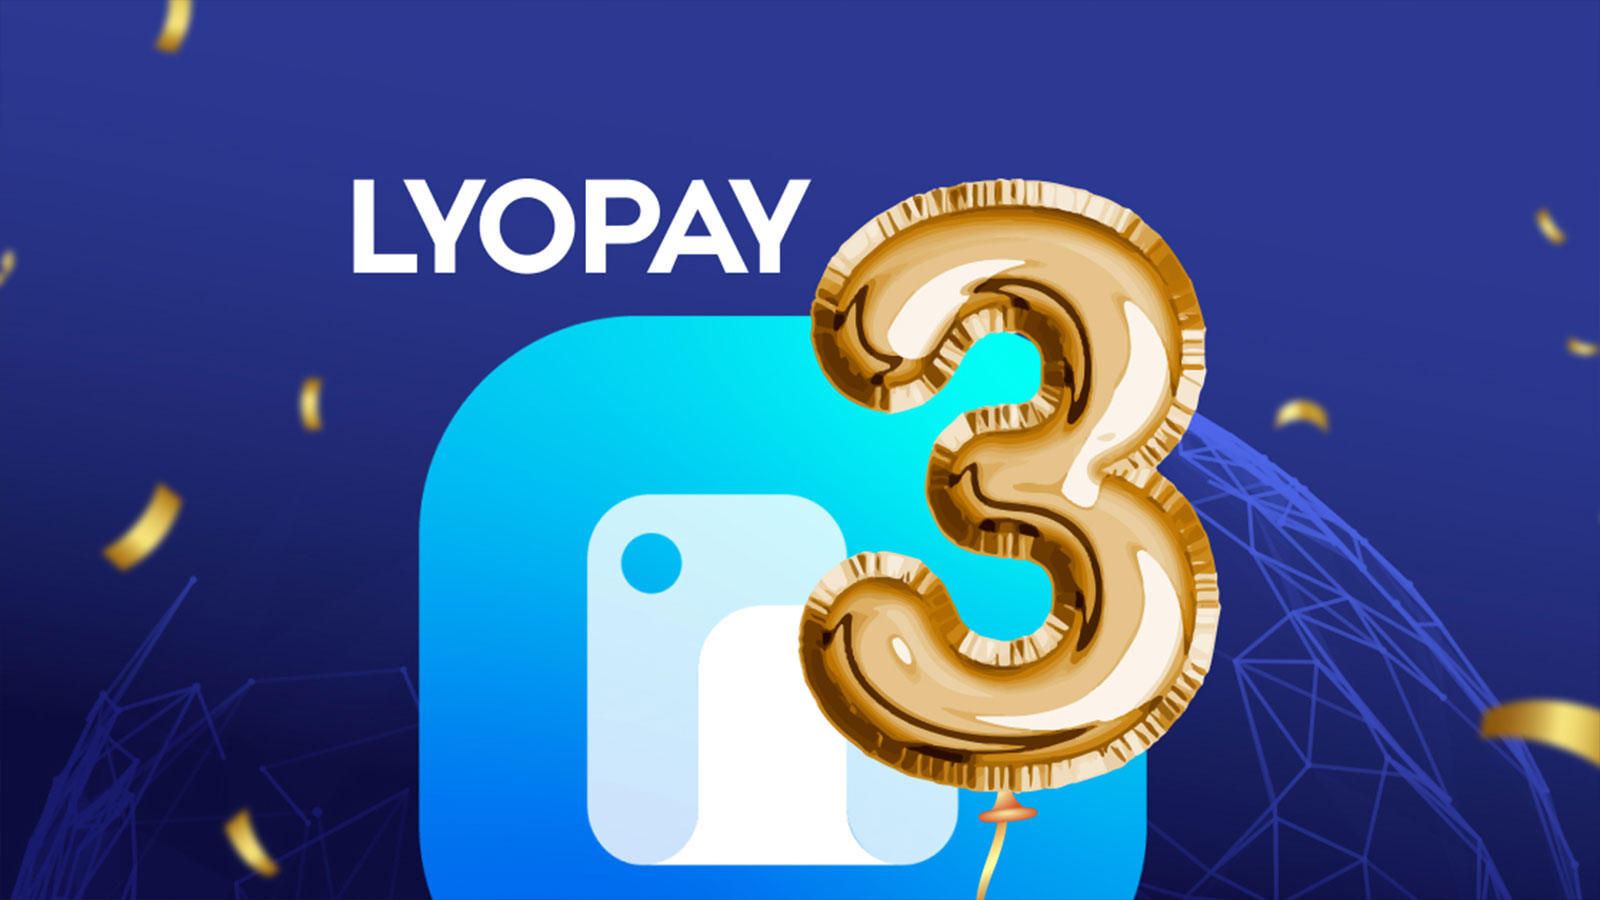 LYOPAY: Over 3 Years of Empowering Users with a Crypto-Friendly Financial Ecosystem